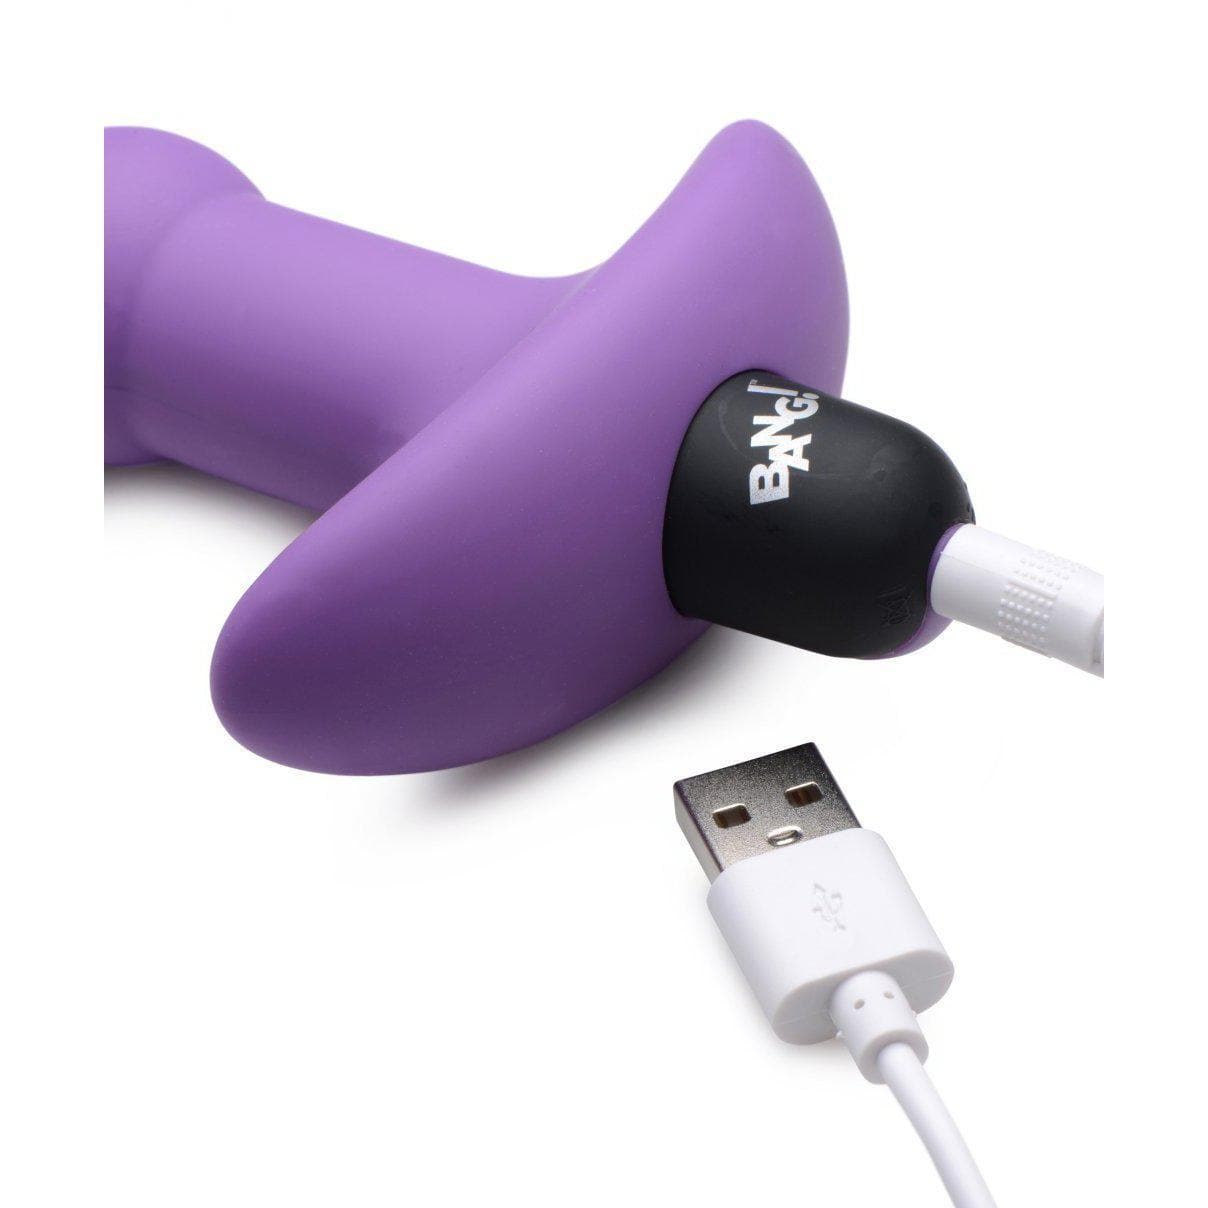 Bang! Vibrating Silicone Rechargeable Anal Beads With Remote Control - Romantic Blessings